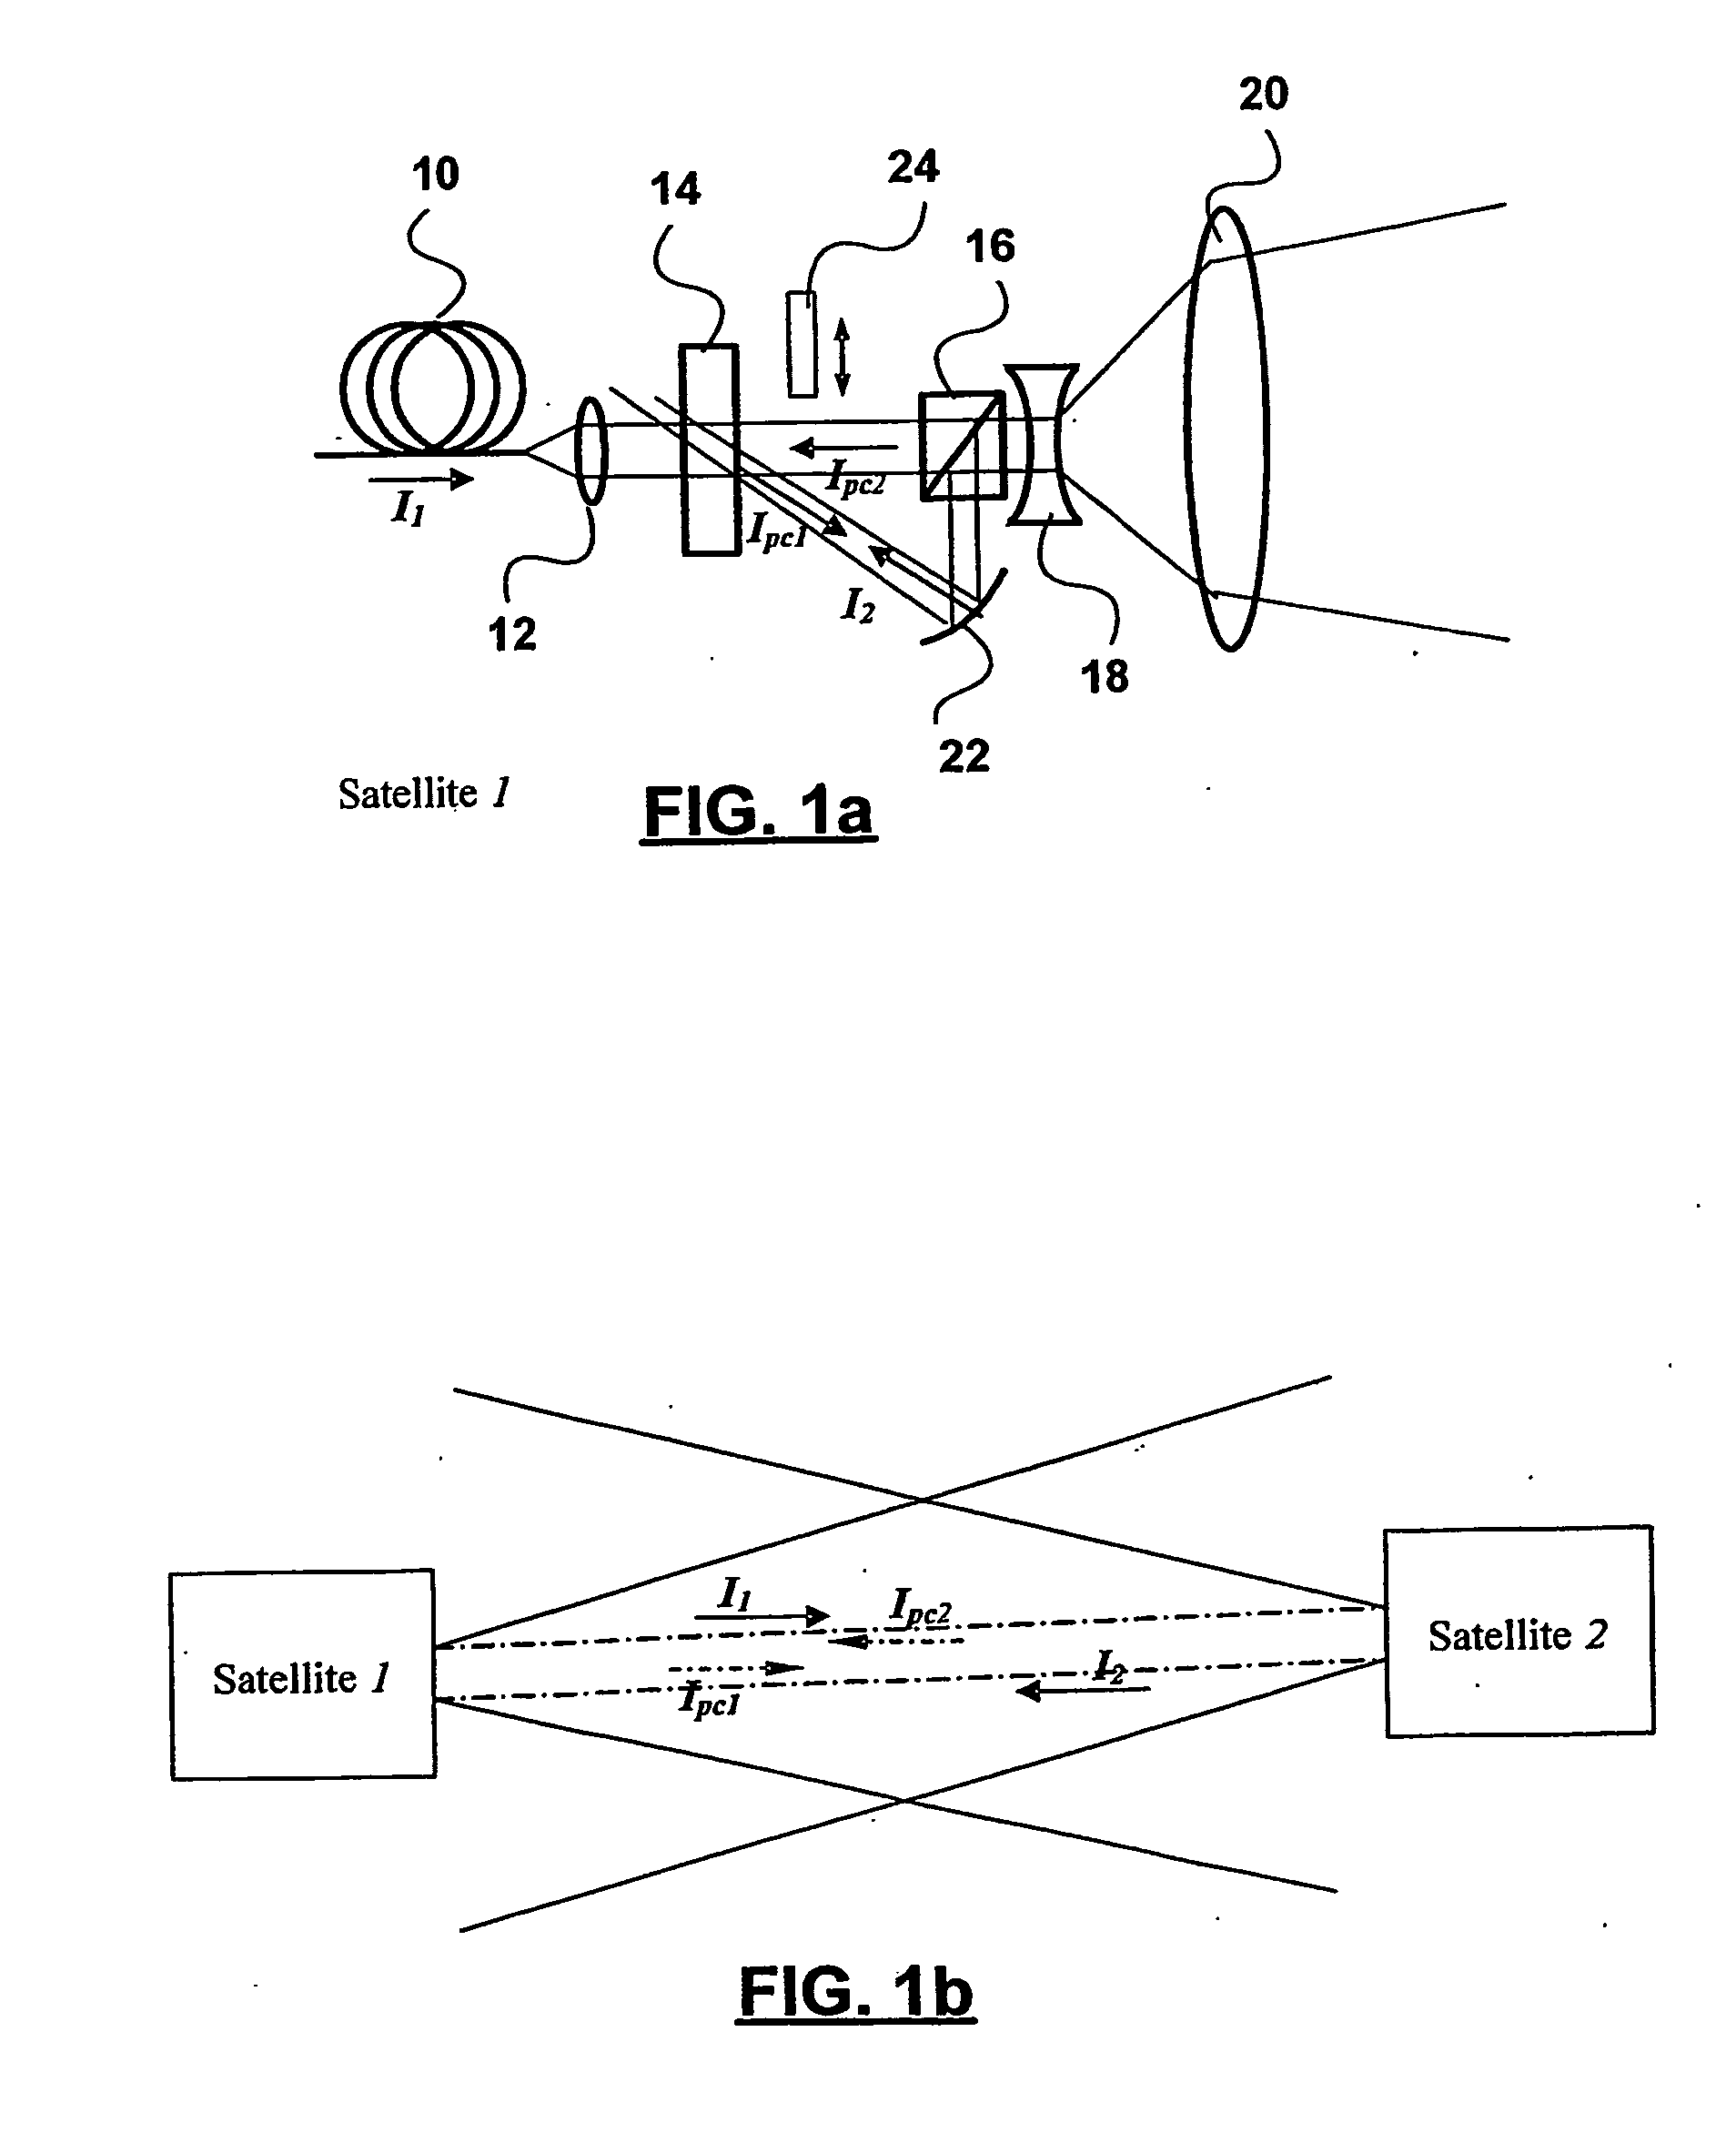 Method of establishing communication through free space between a pair of optical communication devices